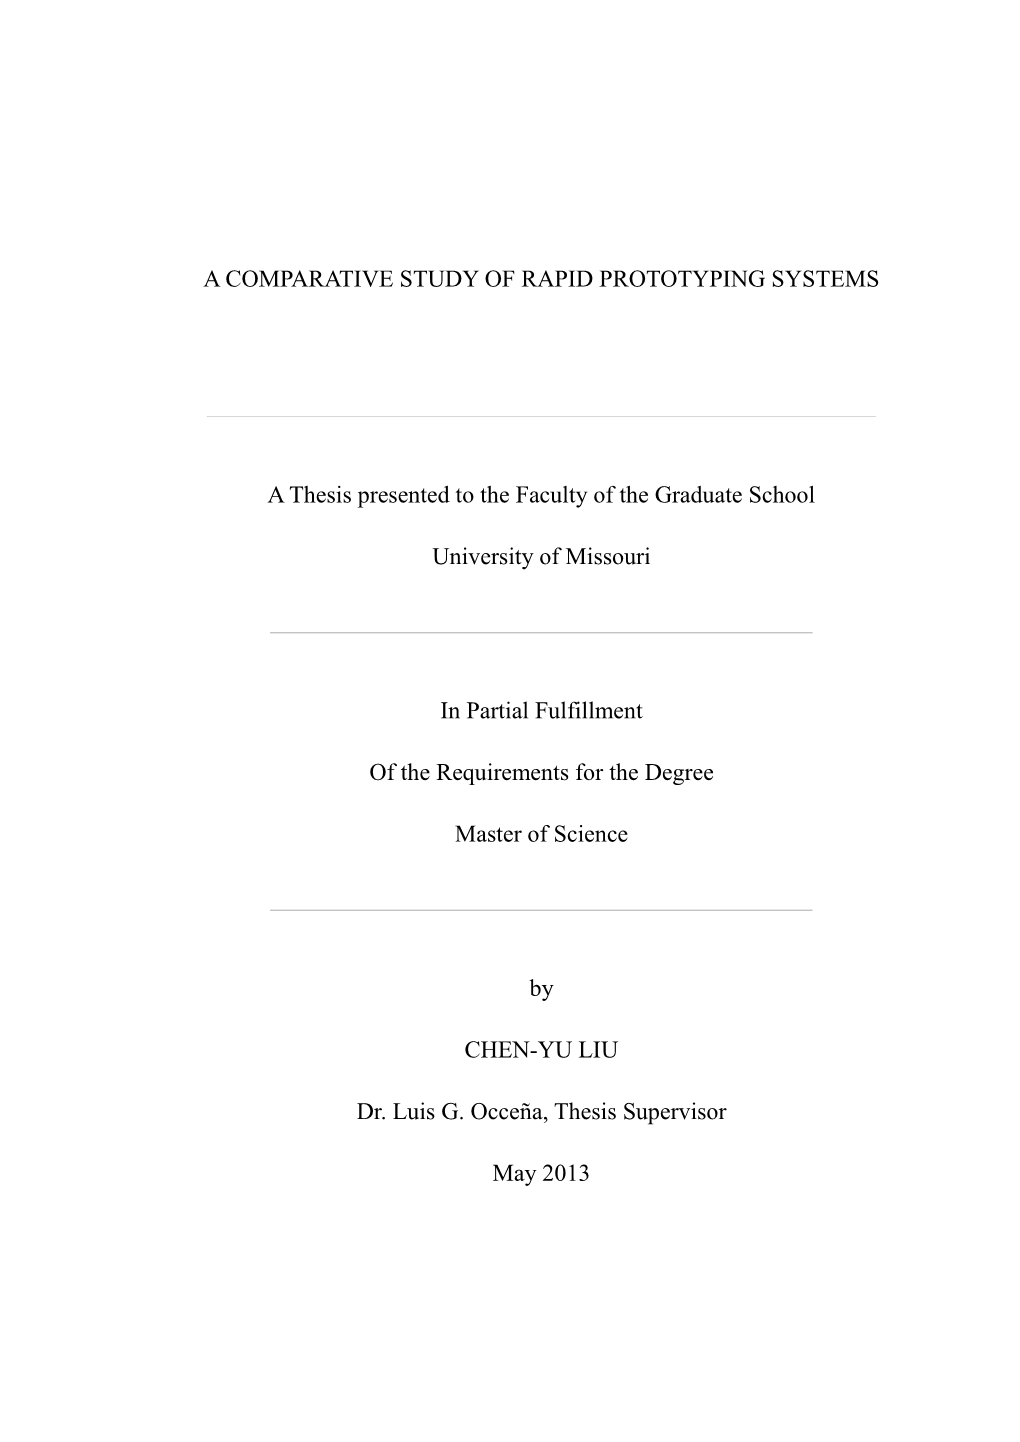 A COMPARATIVE STUDY of RAPID PROTOTYPING SYSTEMS a Thesis Presented to the Faculty of the Graduate School University of Missouri